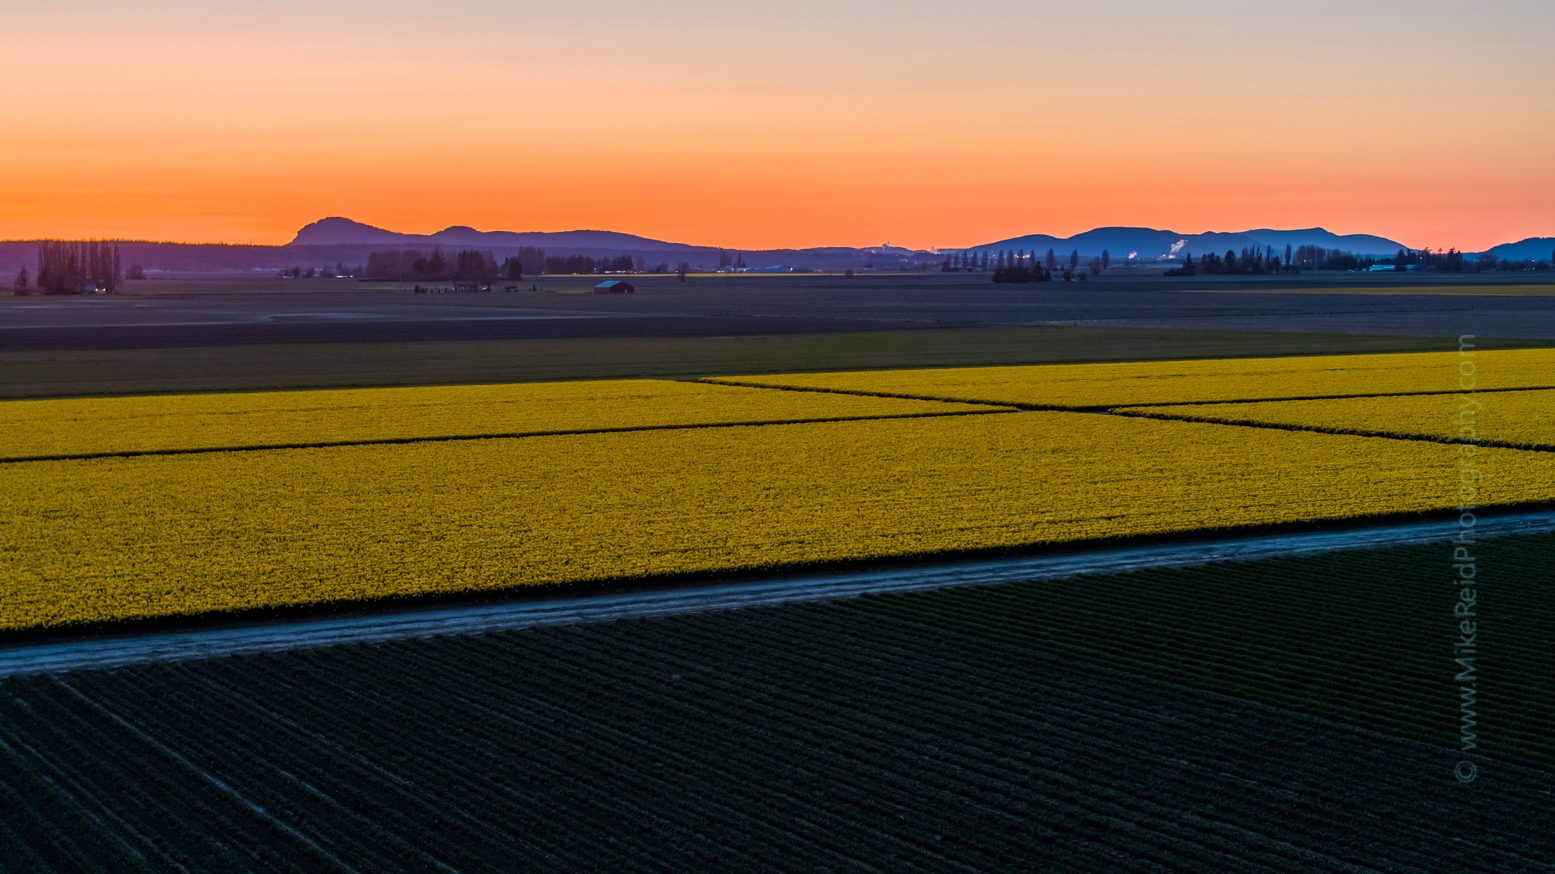 Over the Skagit Valley Sunset Above the Daffodils